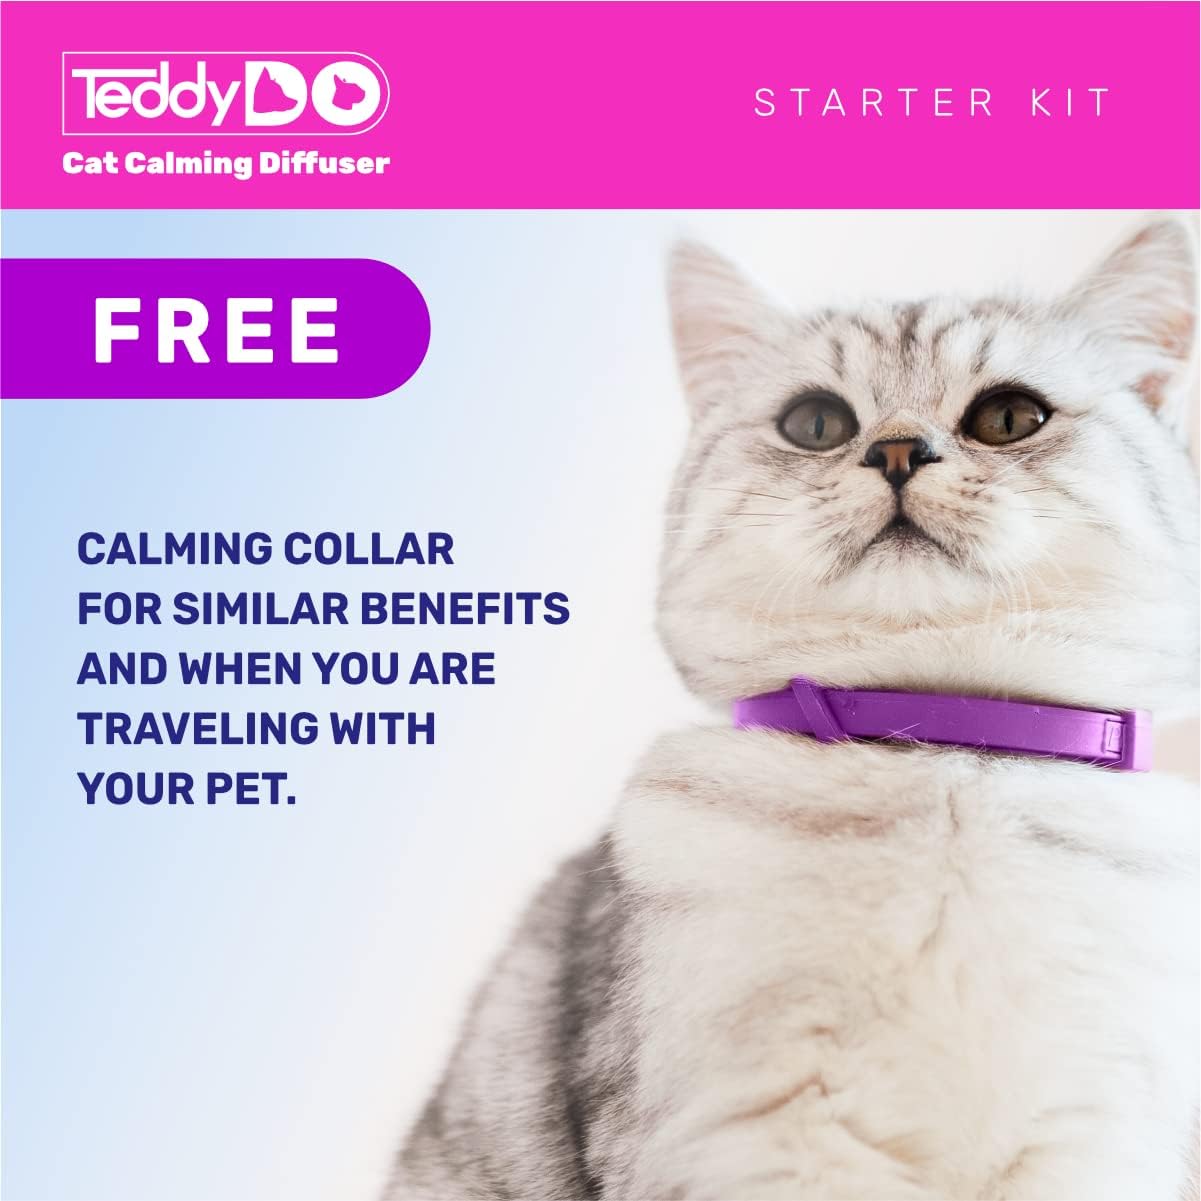 TeddyDo Calming Diffuser for Cats | UK Plug In |Days Starter Kit | Free Calming Collar | Reduce Spraying, Scratching and Other Problematic Behaviors | Calming and Relaxing Effect | 48 ml :Pet Supplies